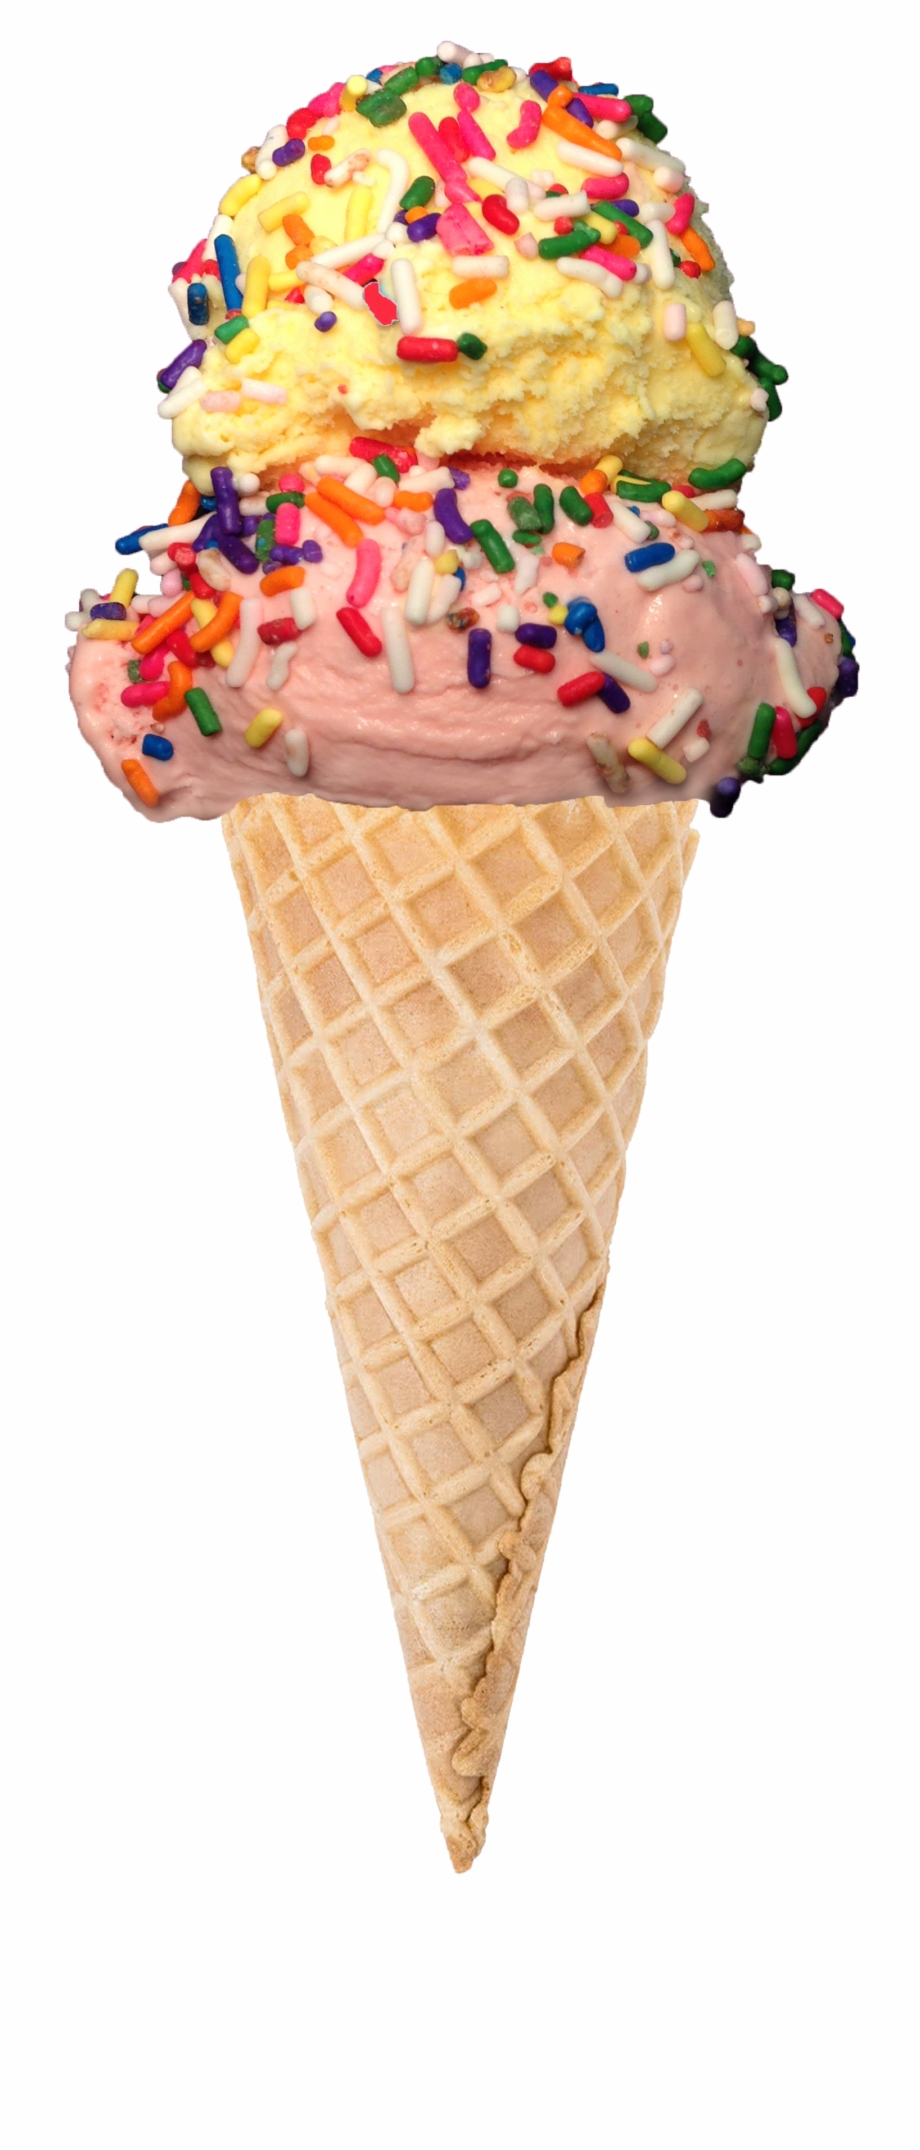 Free Png Ice Cream Cone, Download Free Png Ice Cream Cone png images ...